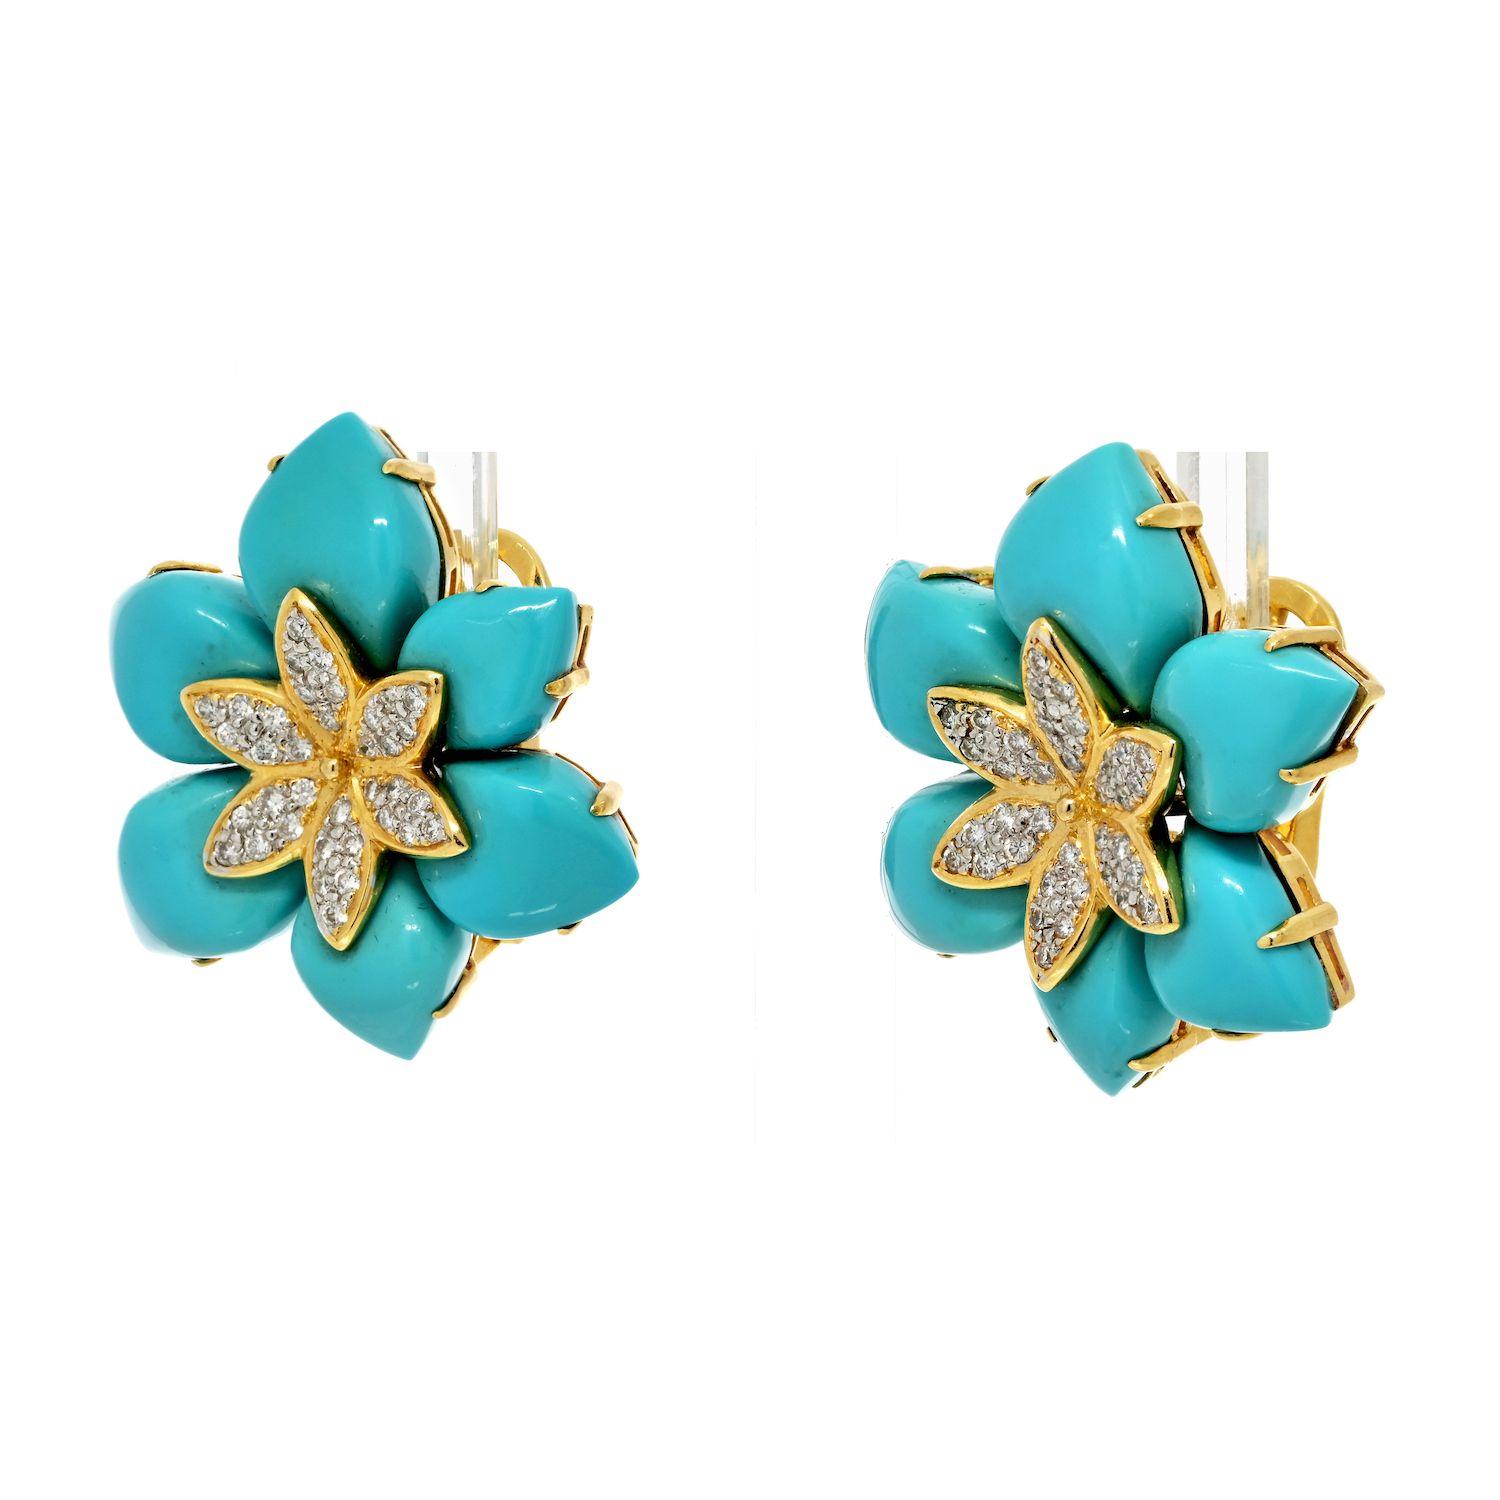 The estate 18K Yellow Gold Turquoise Earrings with Pave Diamonds in the center are a magnificent pair of earrings that effortlessly blend elegance and vibrant color. Crafted in 18K yellow gold, these earrings showcase exquisite turquoise gemstones